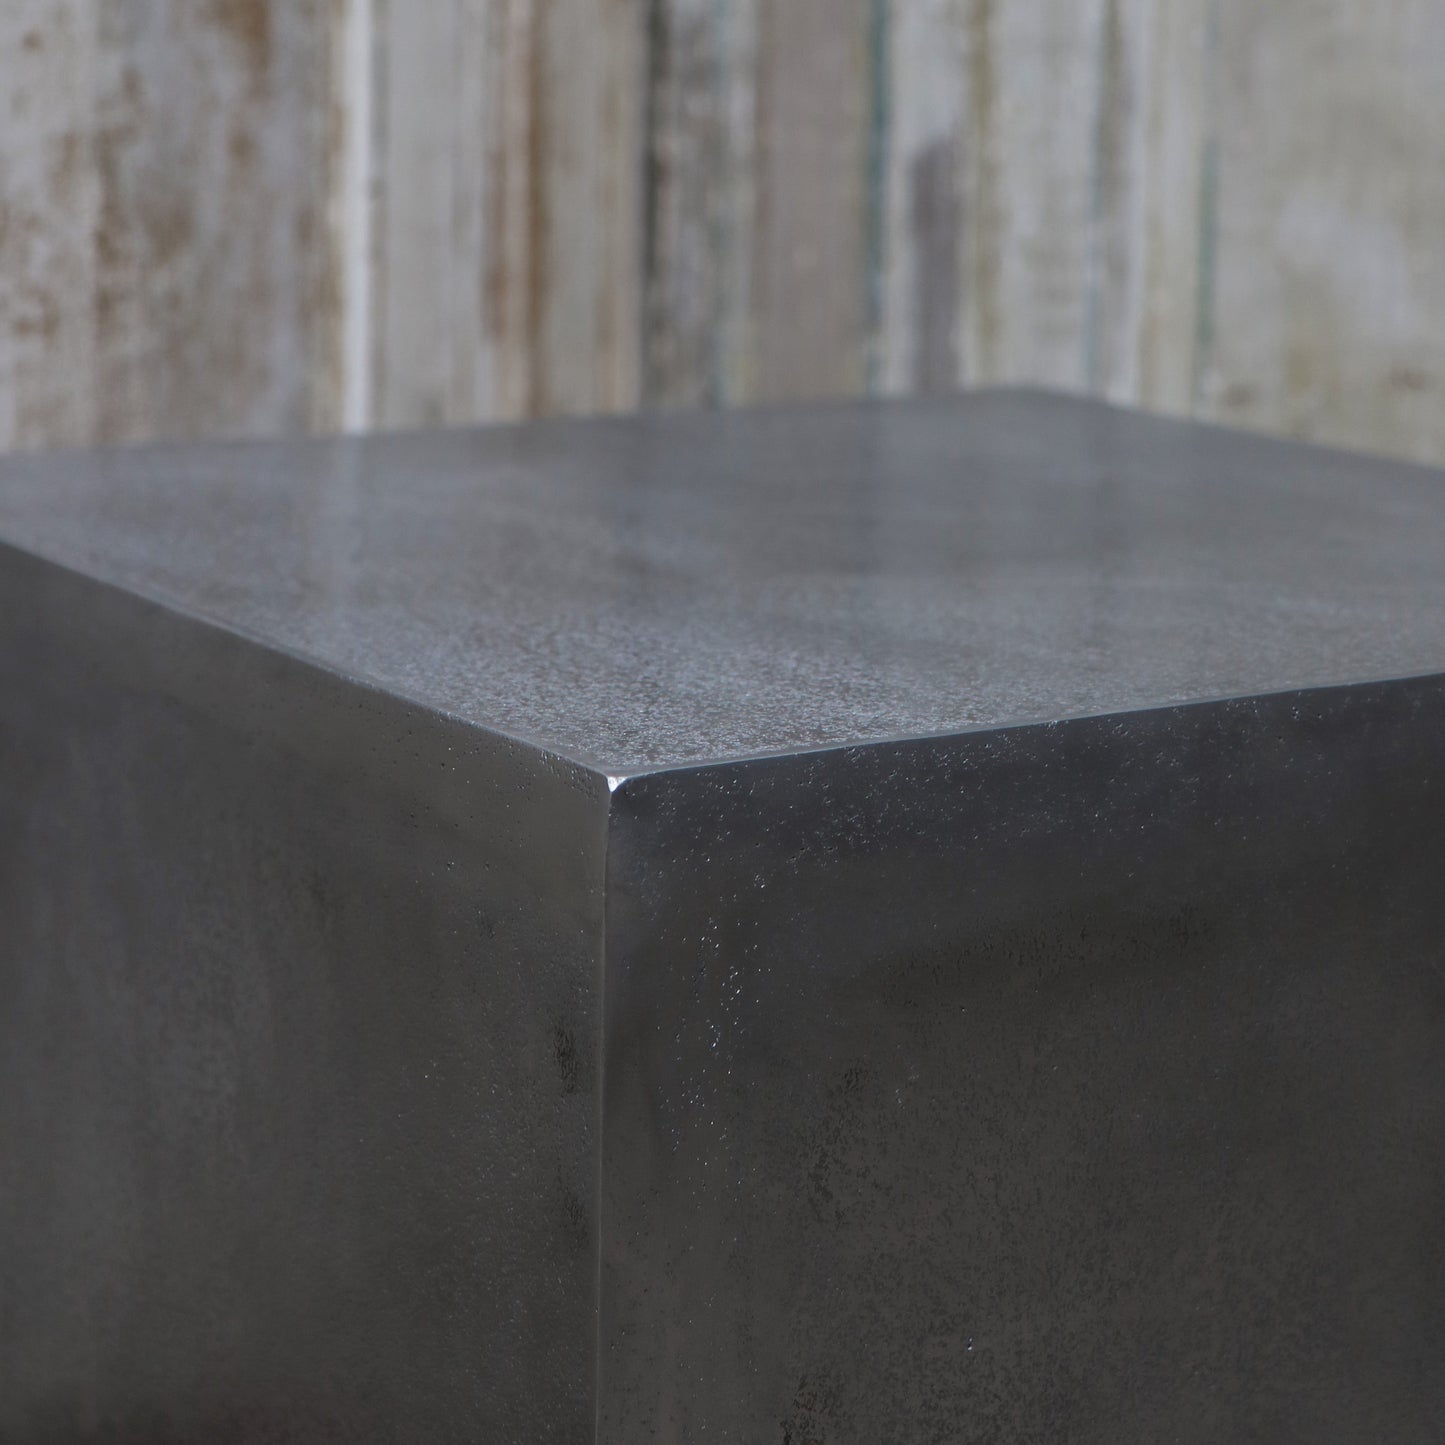 ALUMINUM SIDE TABLE FROM JOURNEY BY OLIVER GUSTAV